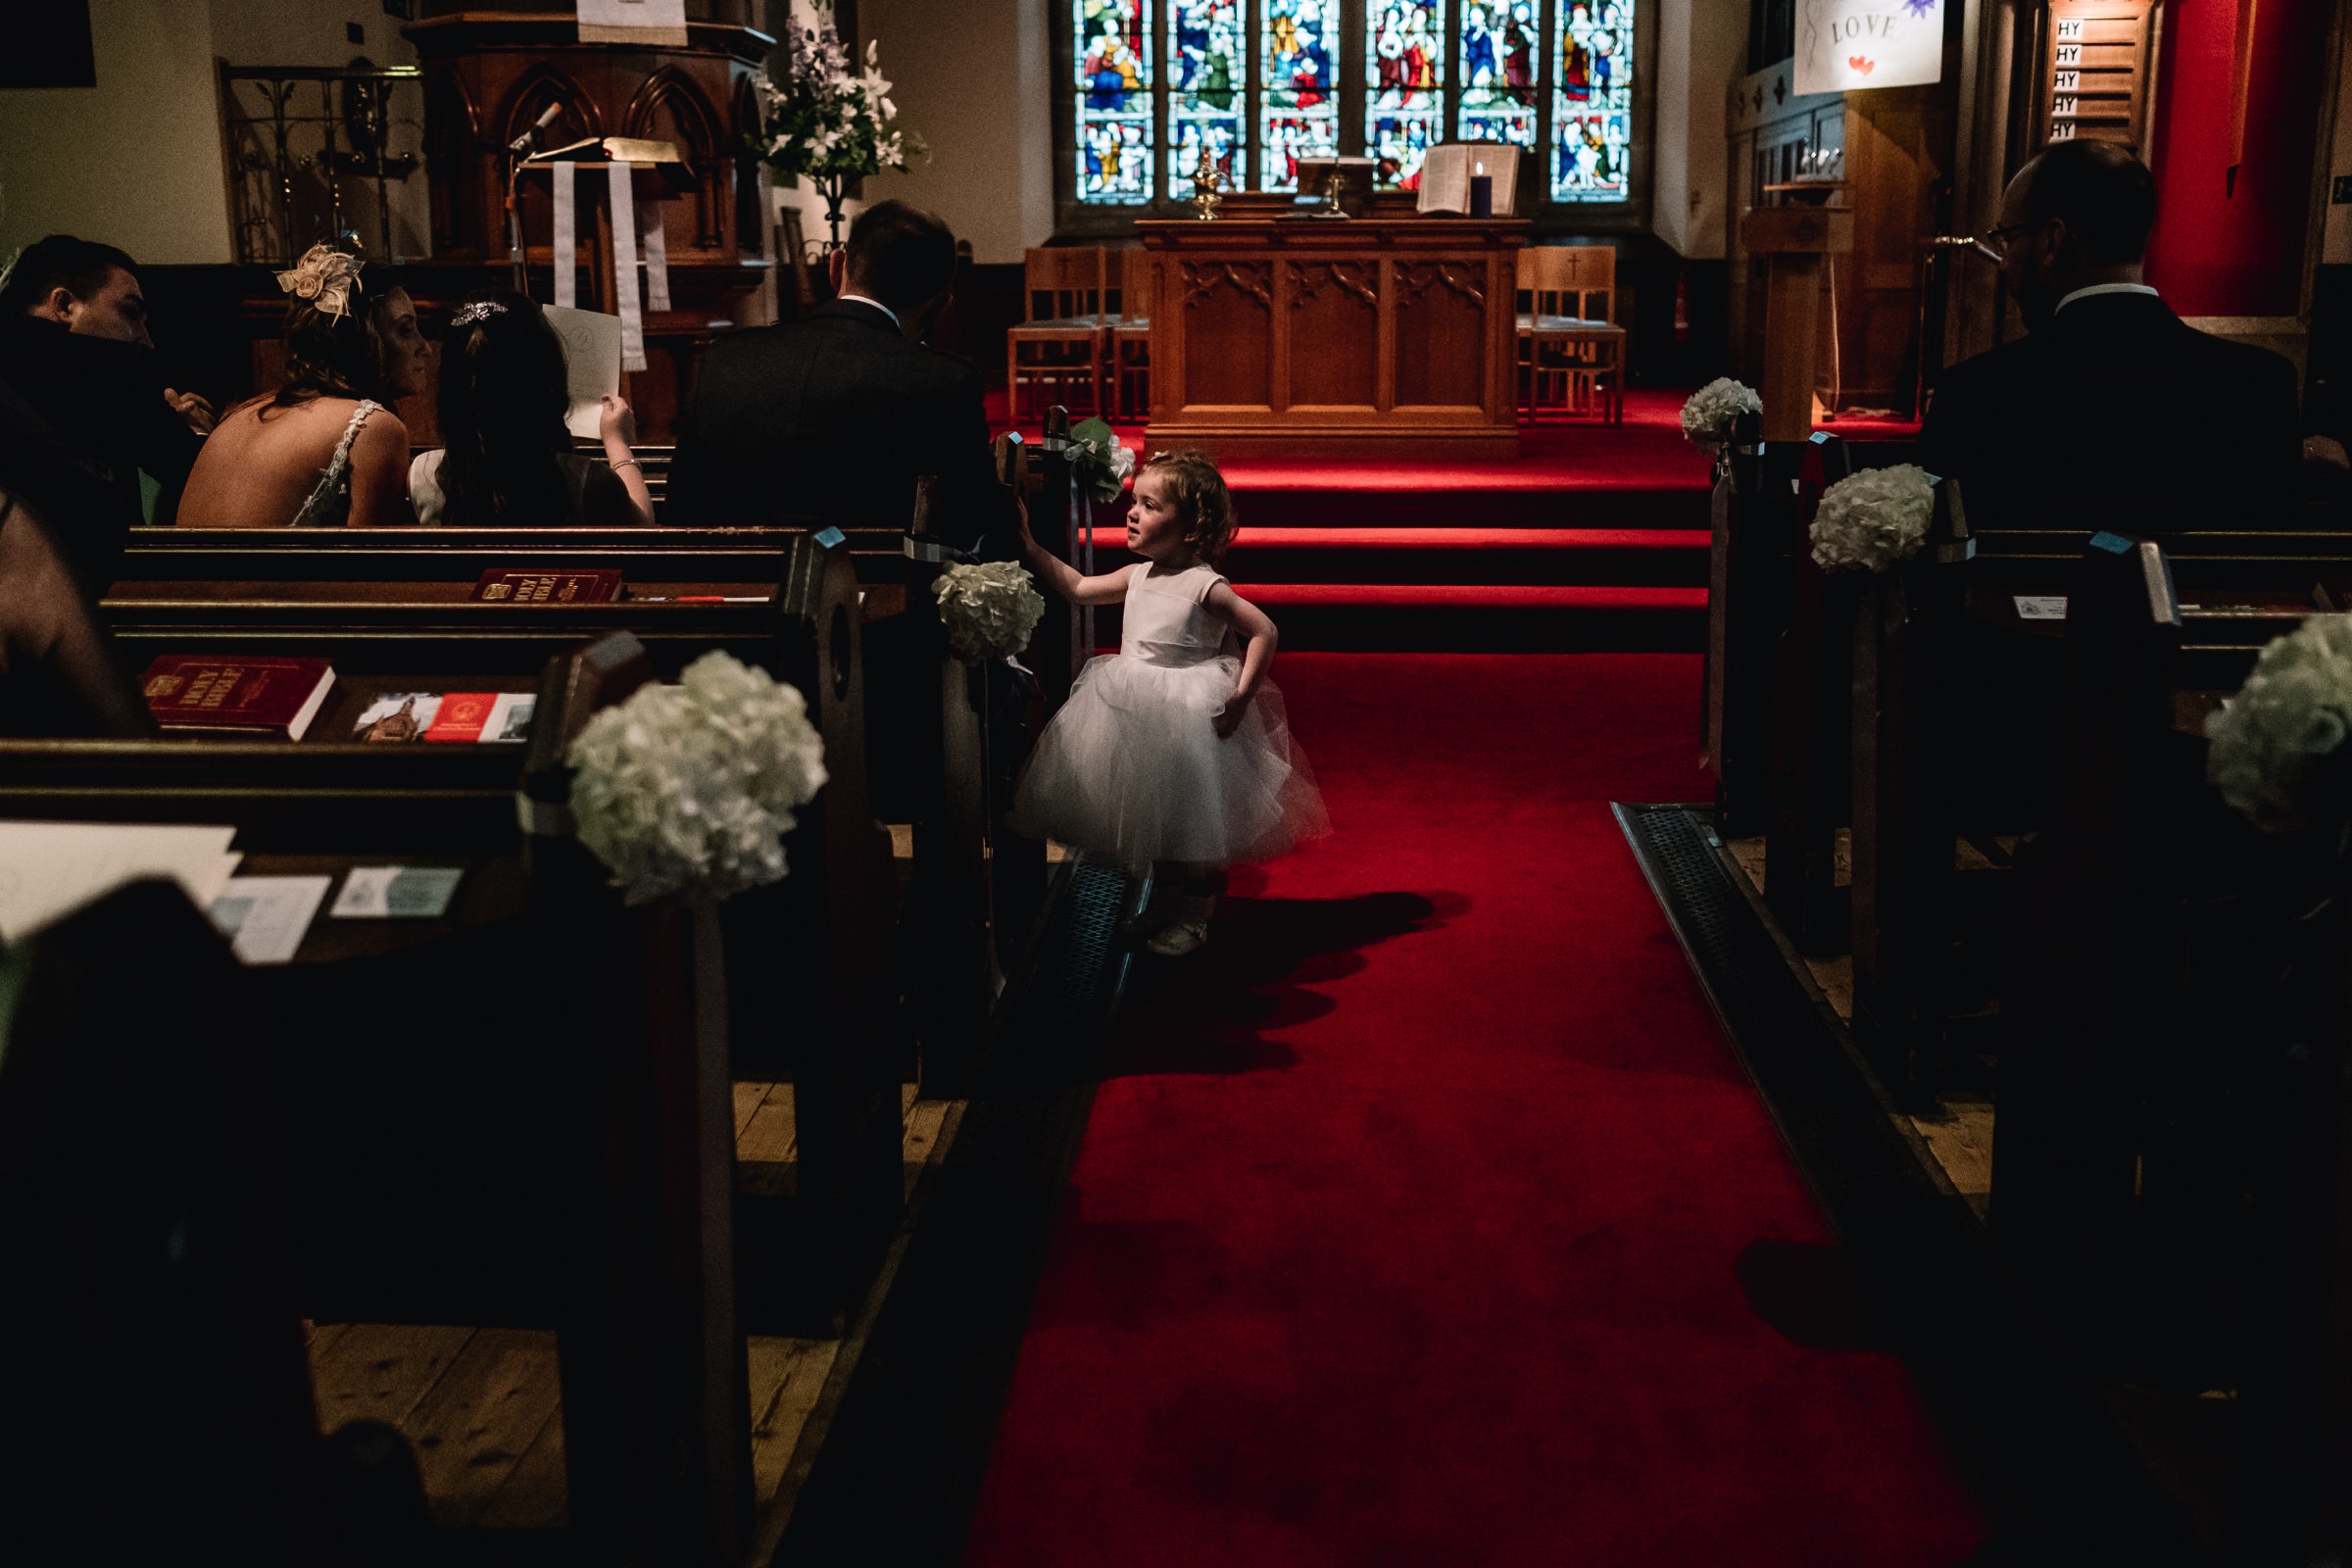 Young wedding guests stands in aisle